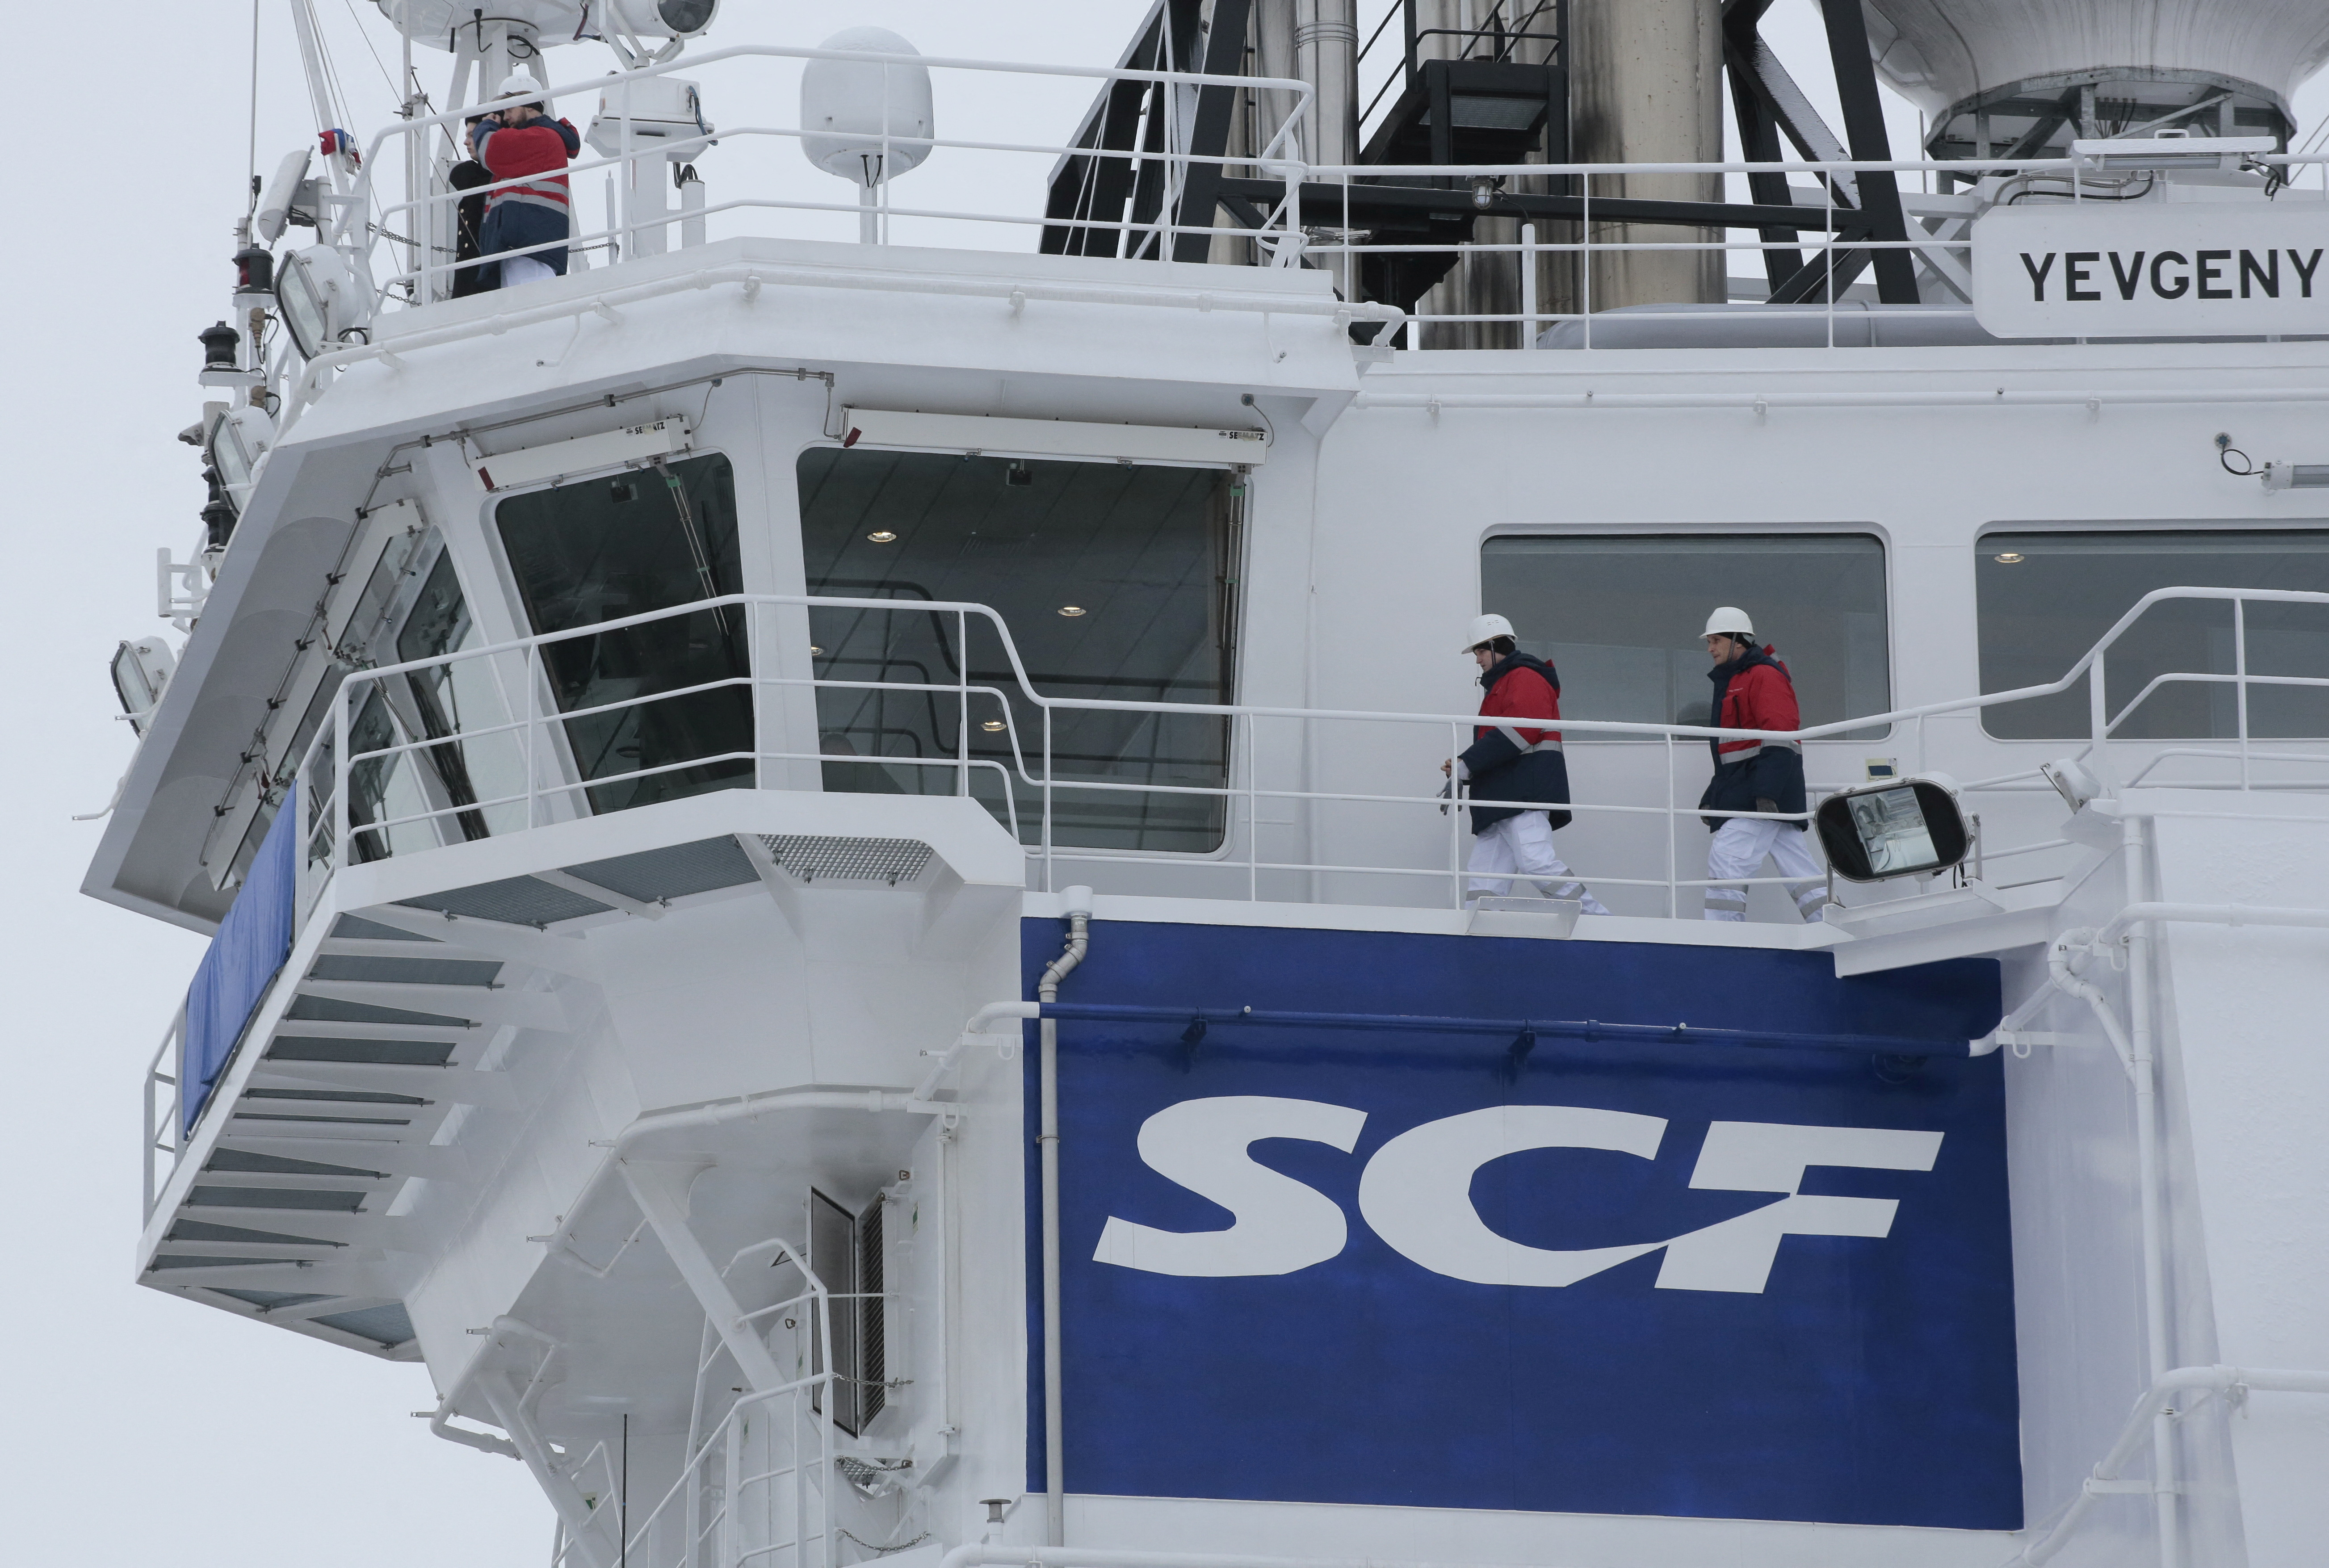 The logo of Russian state shipping company Sovcomflot is seen on the multifunctional icebreaking standby vessel "Yevgeny Primakov" moored in central St. Petersburg